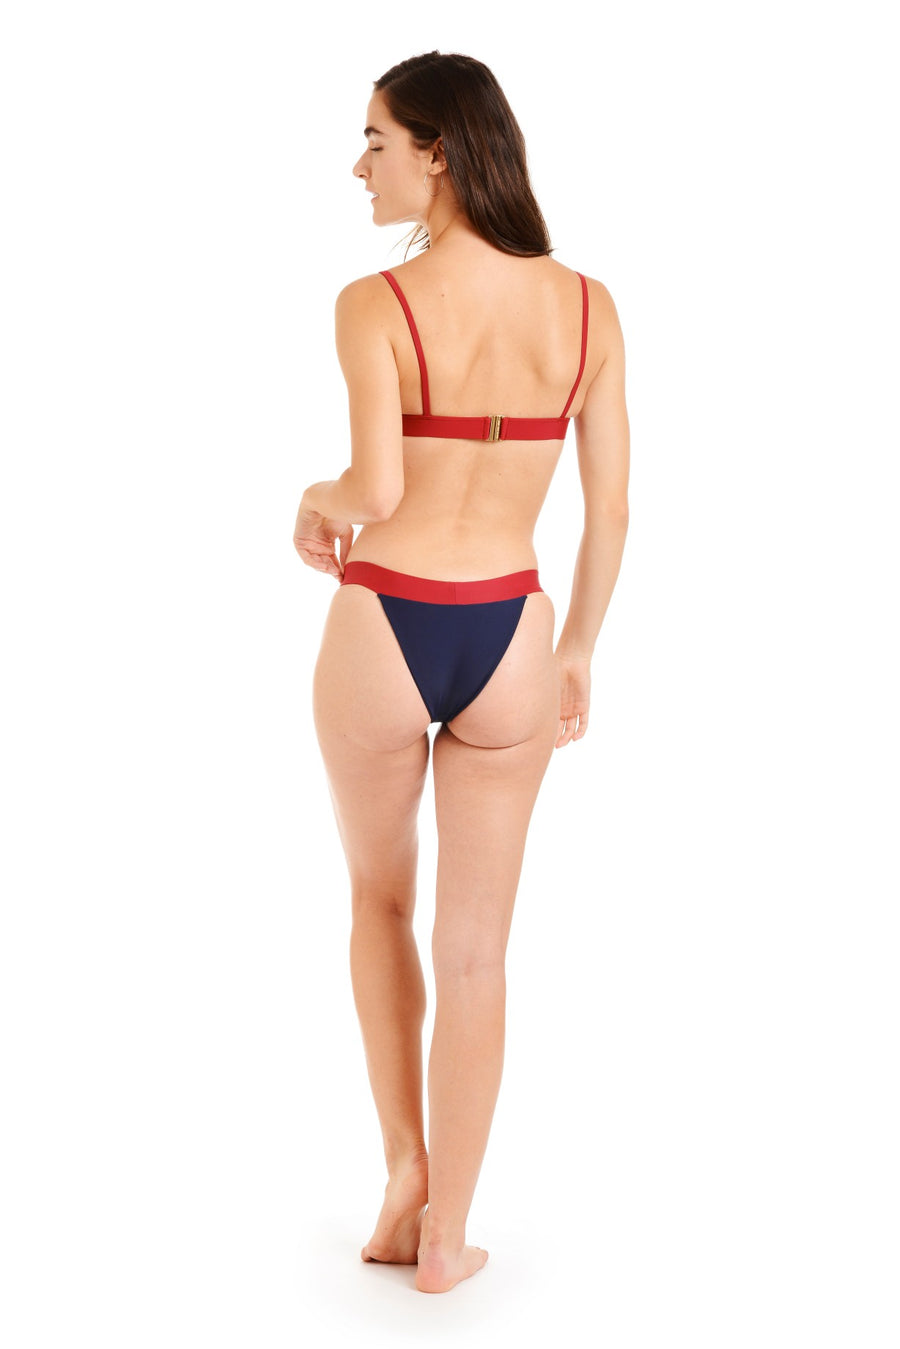 Back view of a woman in navy and red bikini bottoms